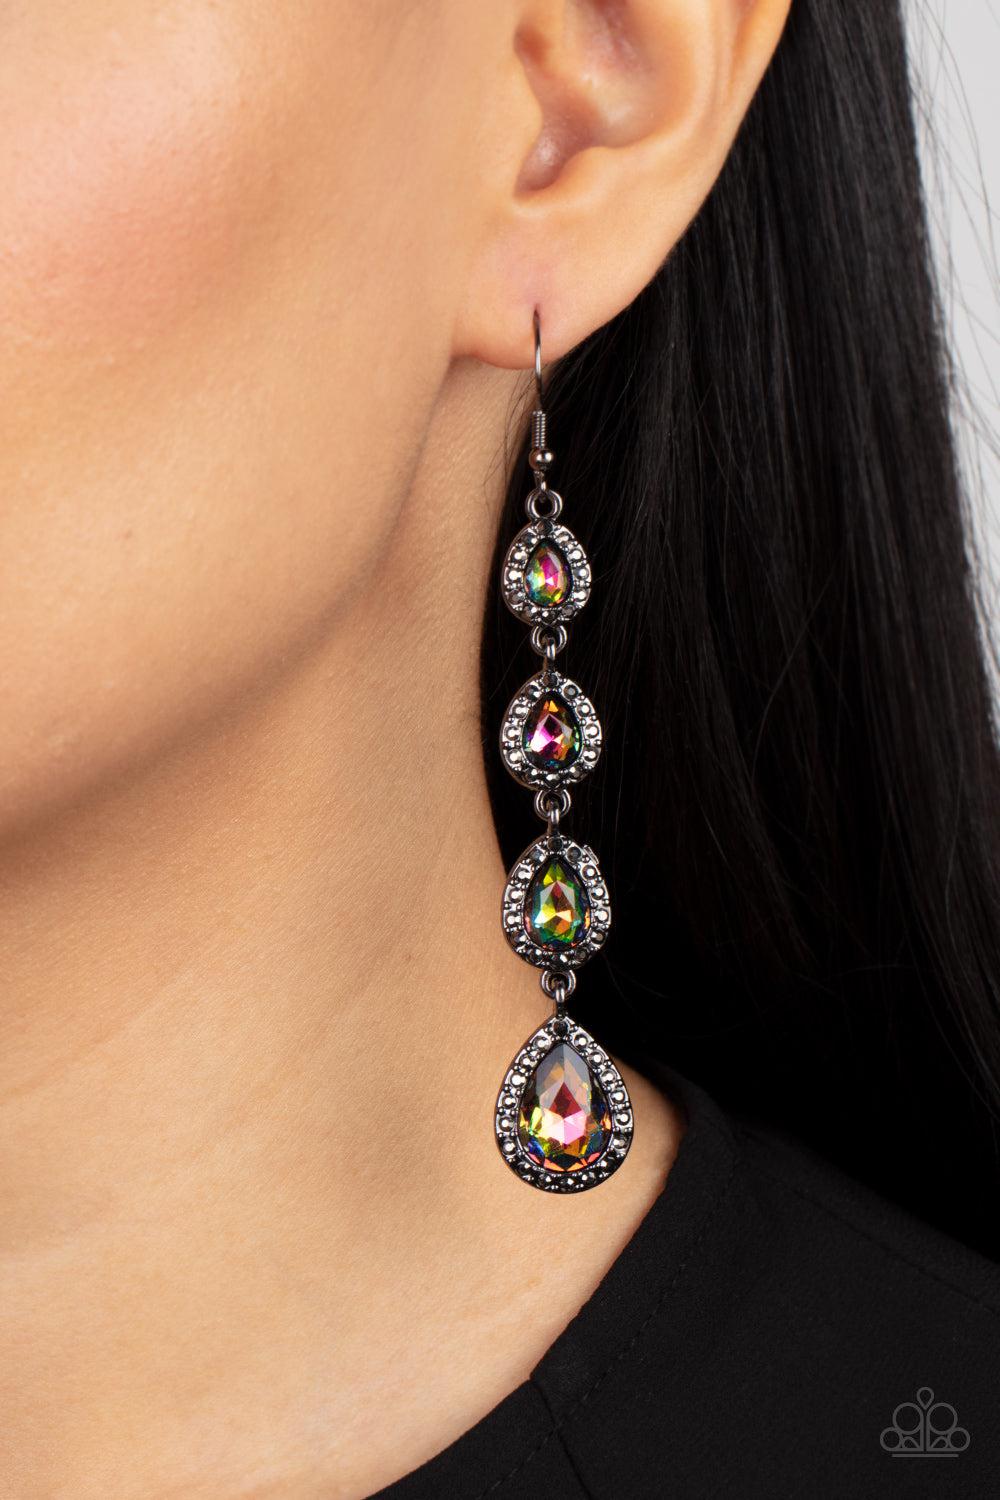 Confidently Classy Multi Oil Spill Rhinestone Earrings - Paparazzi Accessories-on model - CarasShop.com - $5 Jewelry by Cara Jewels